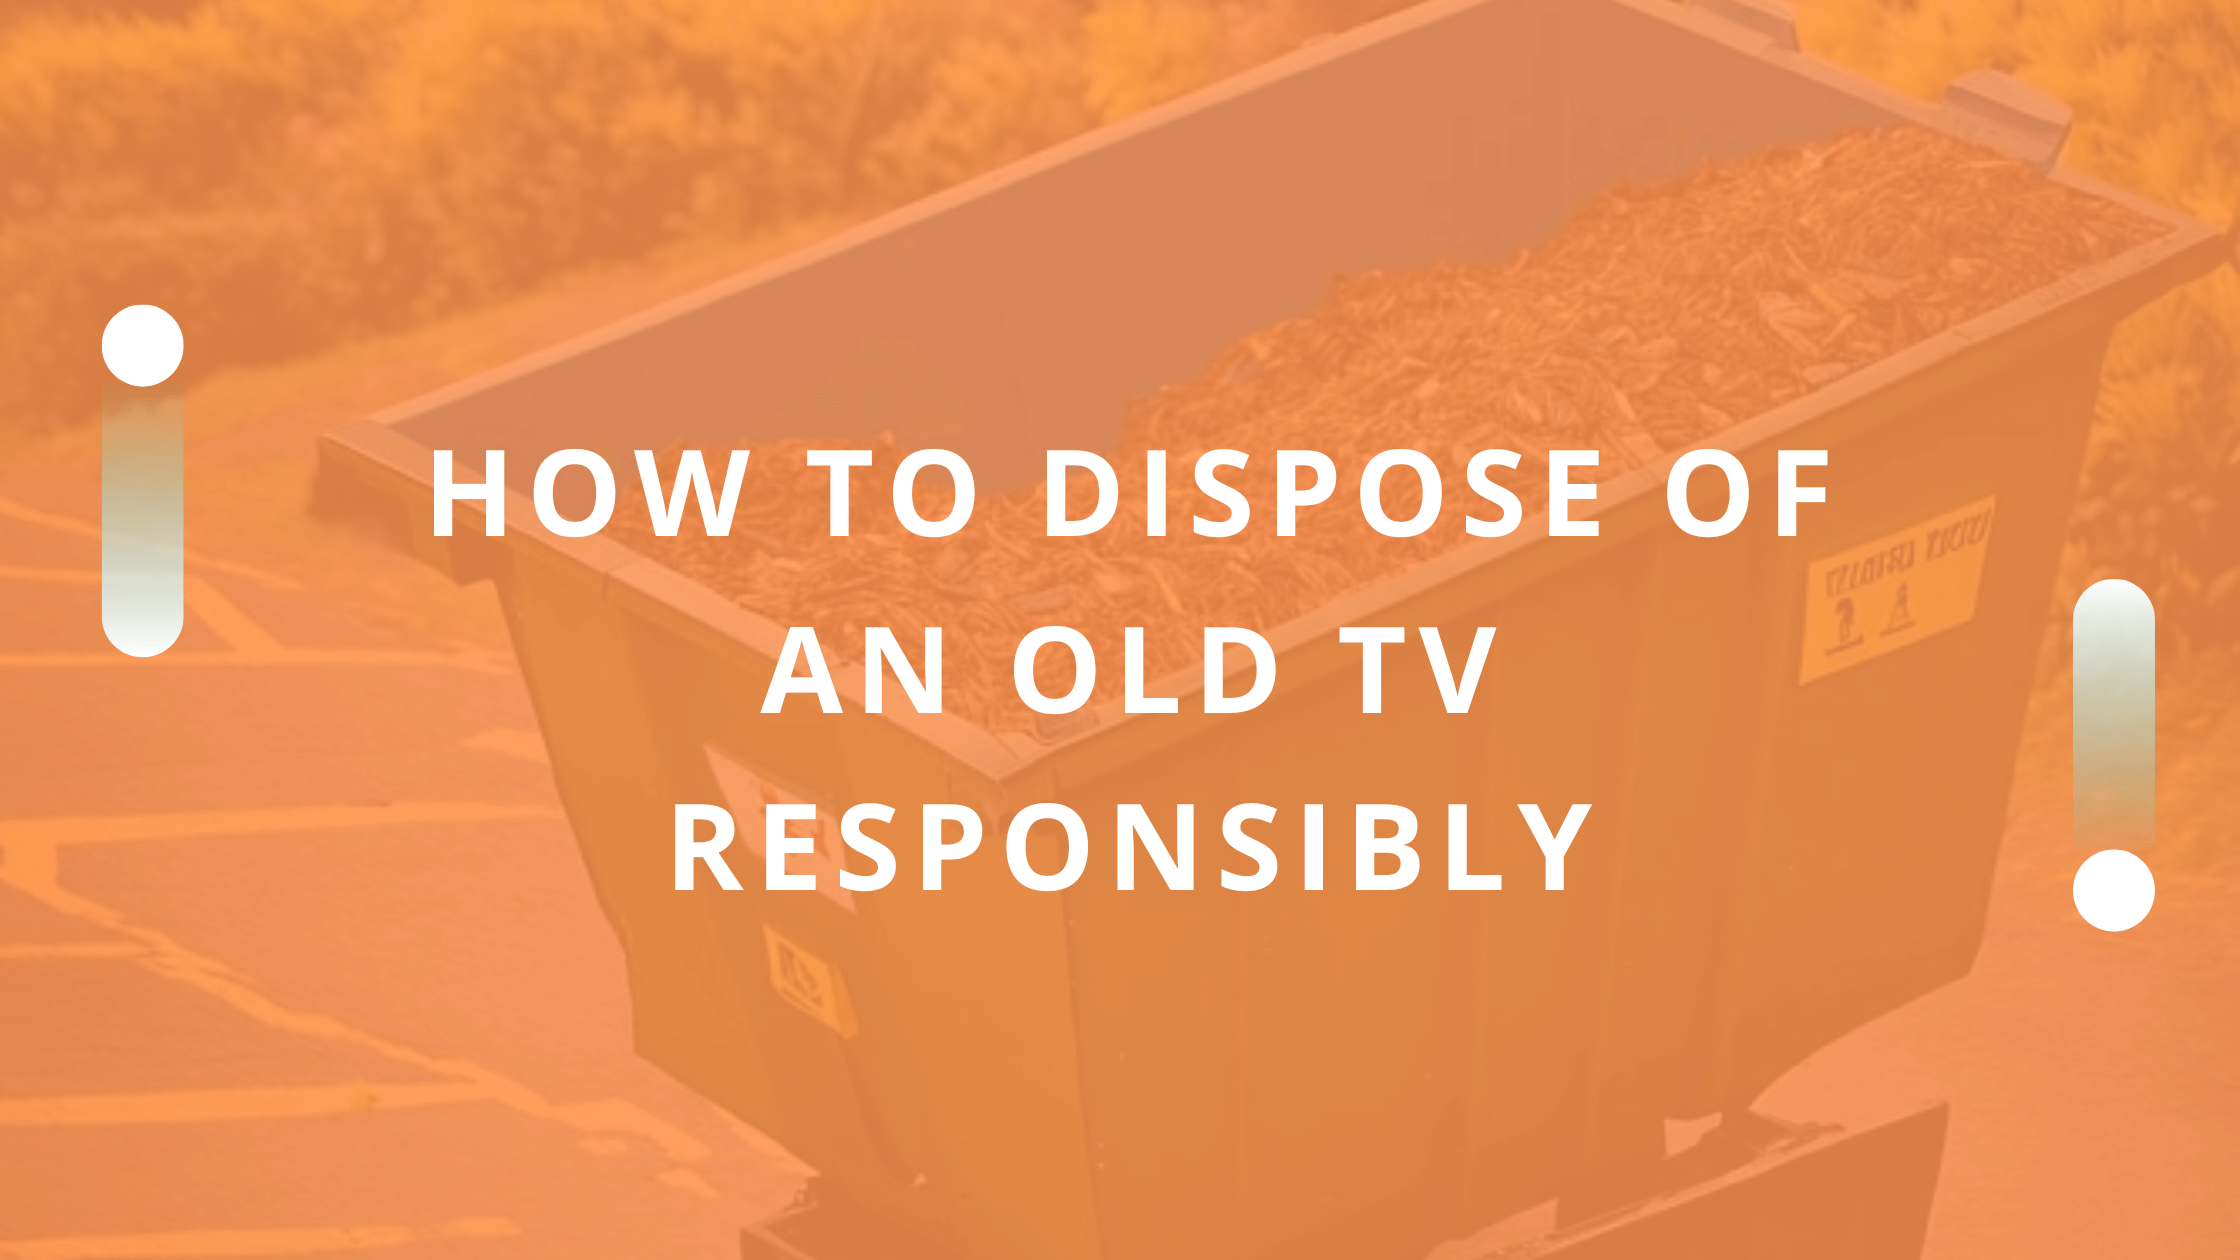 how to dispose of old tv responsibly